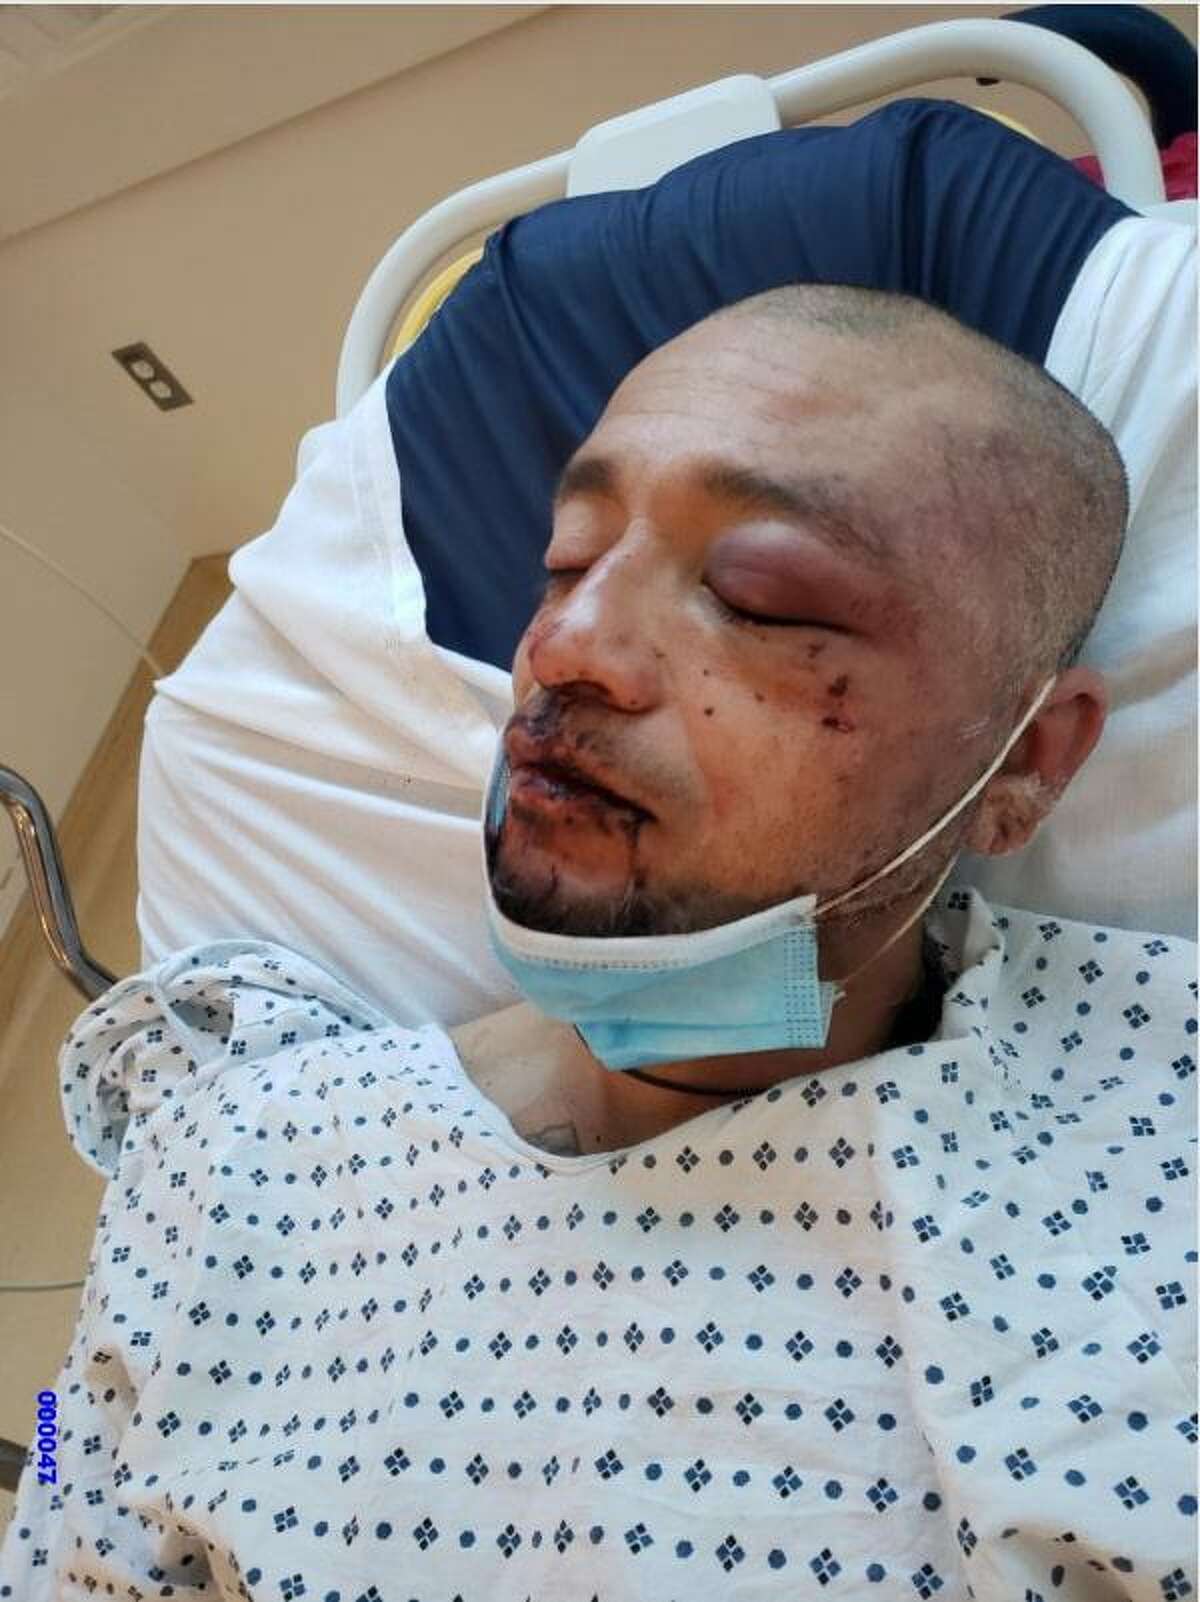 Sergio Lugo was injured in a February confrontation with three S.F. police officers.